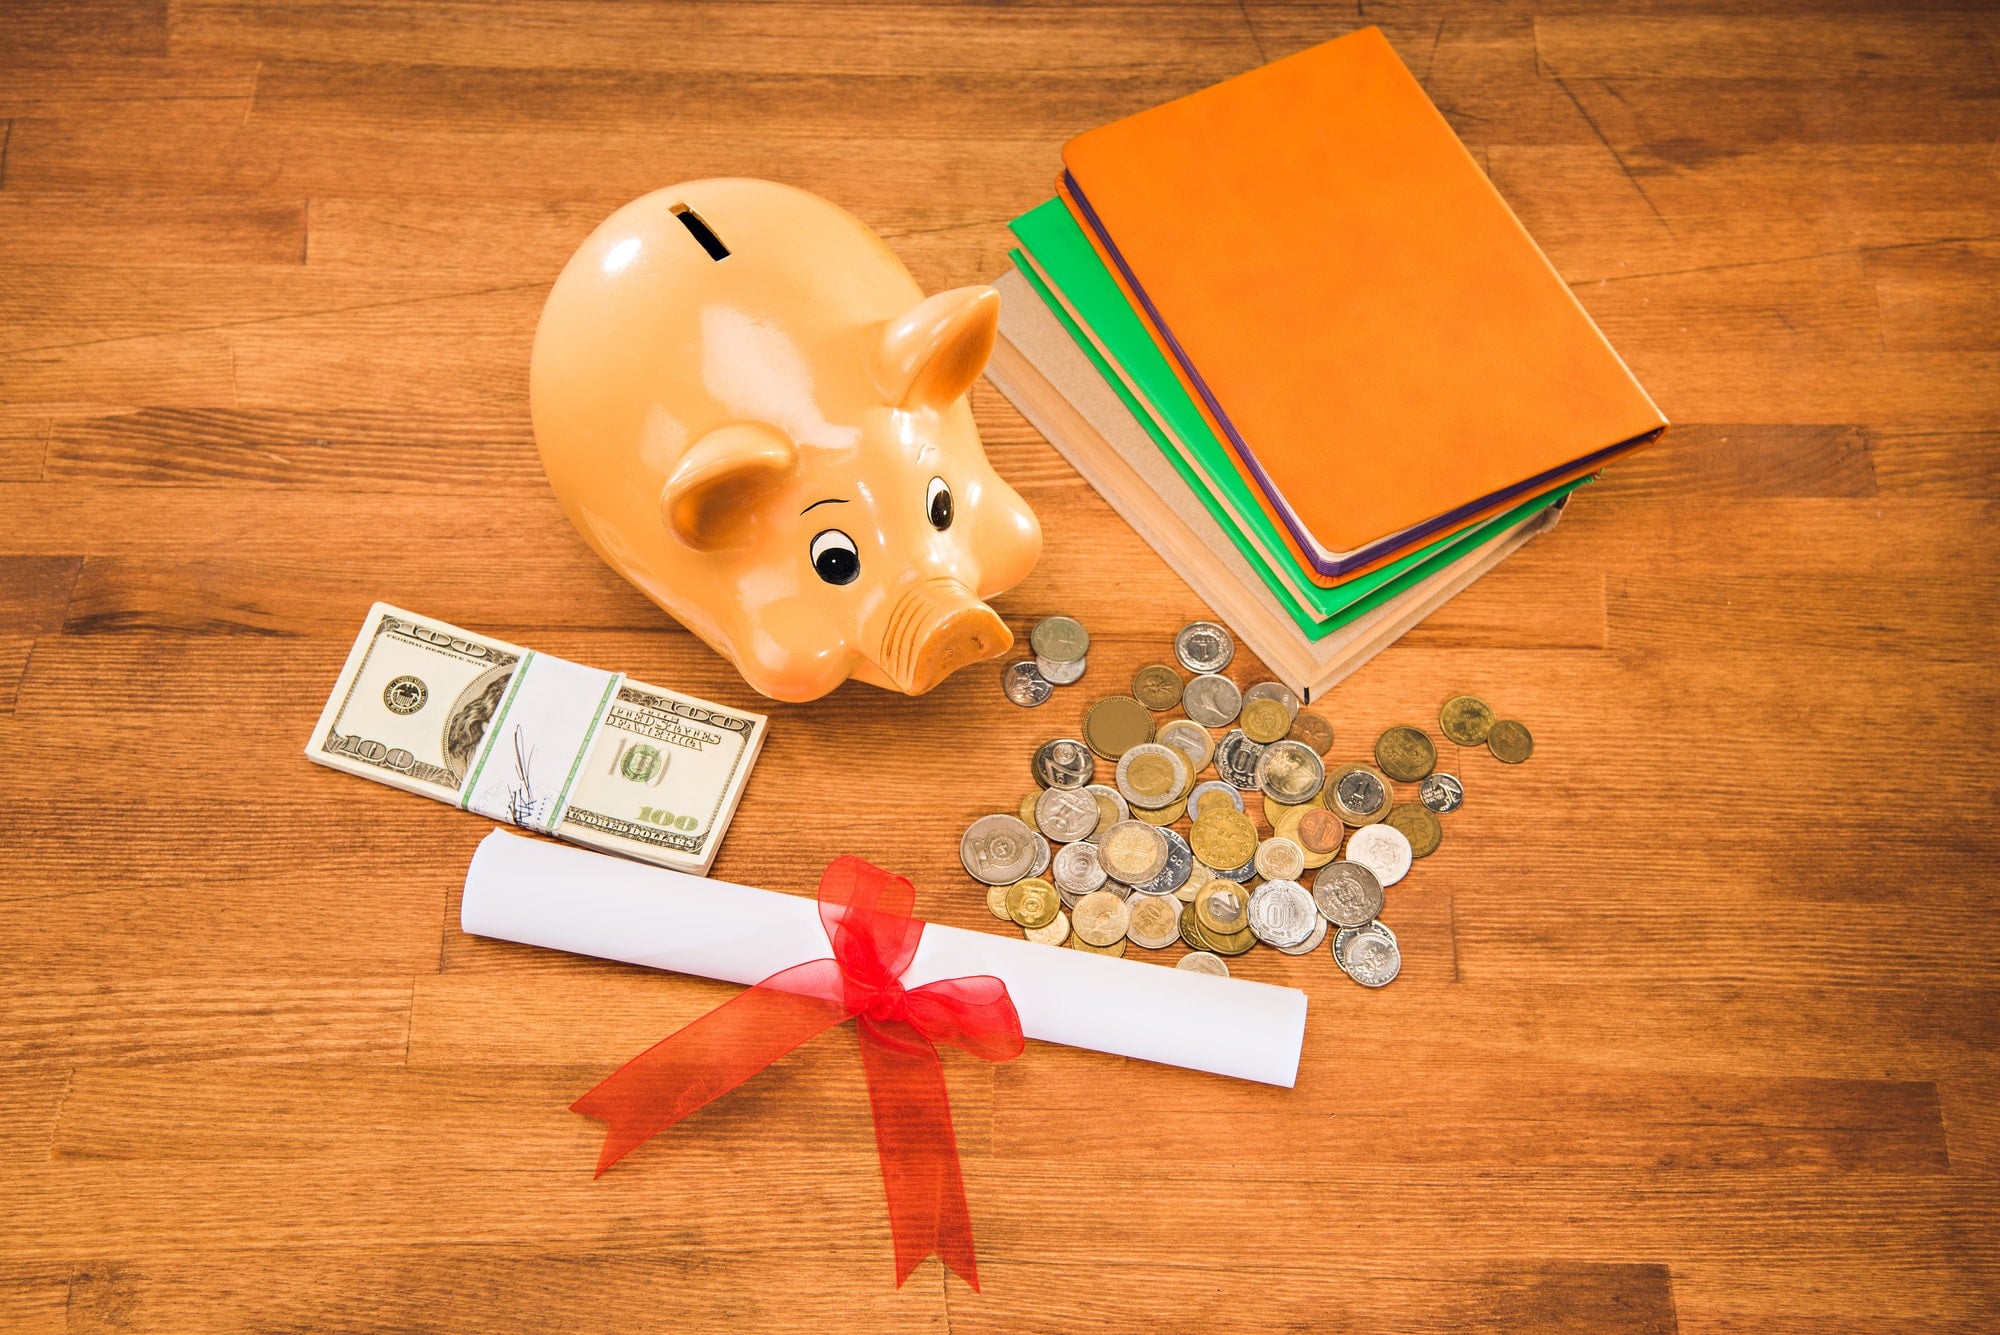 diploma, books and piggy bank with coins and dollars on wooden tabletop, education concept